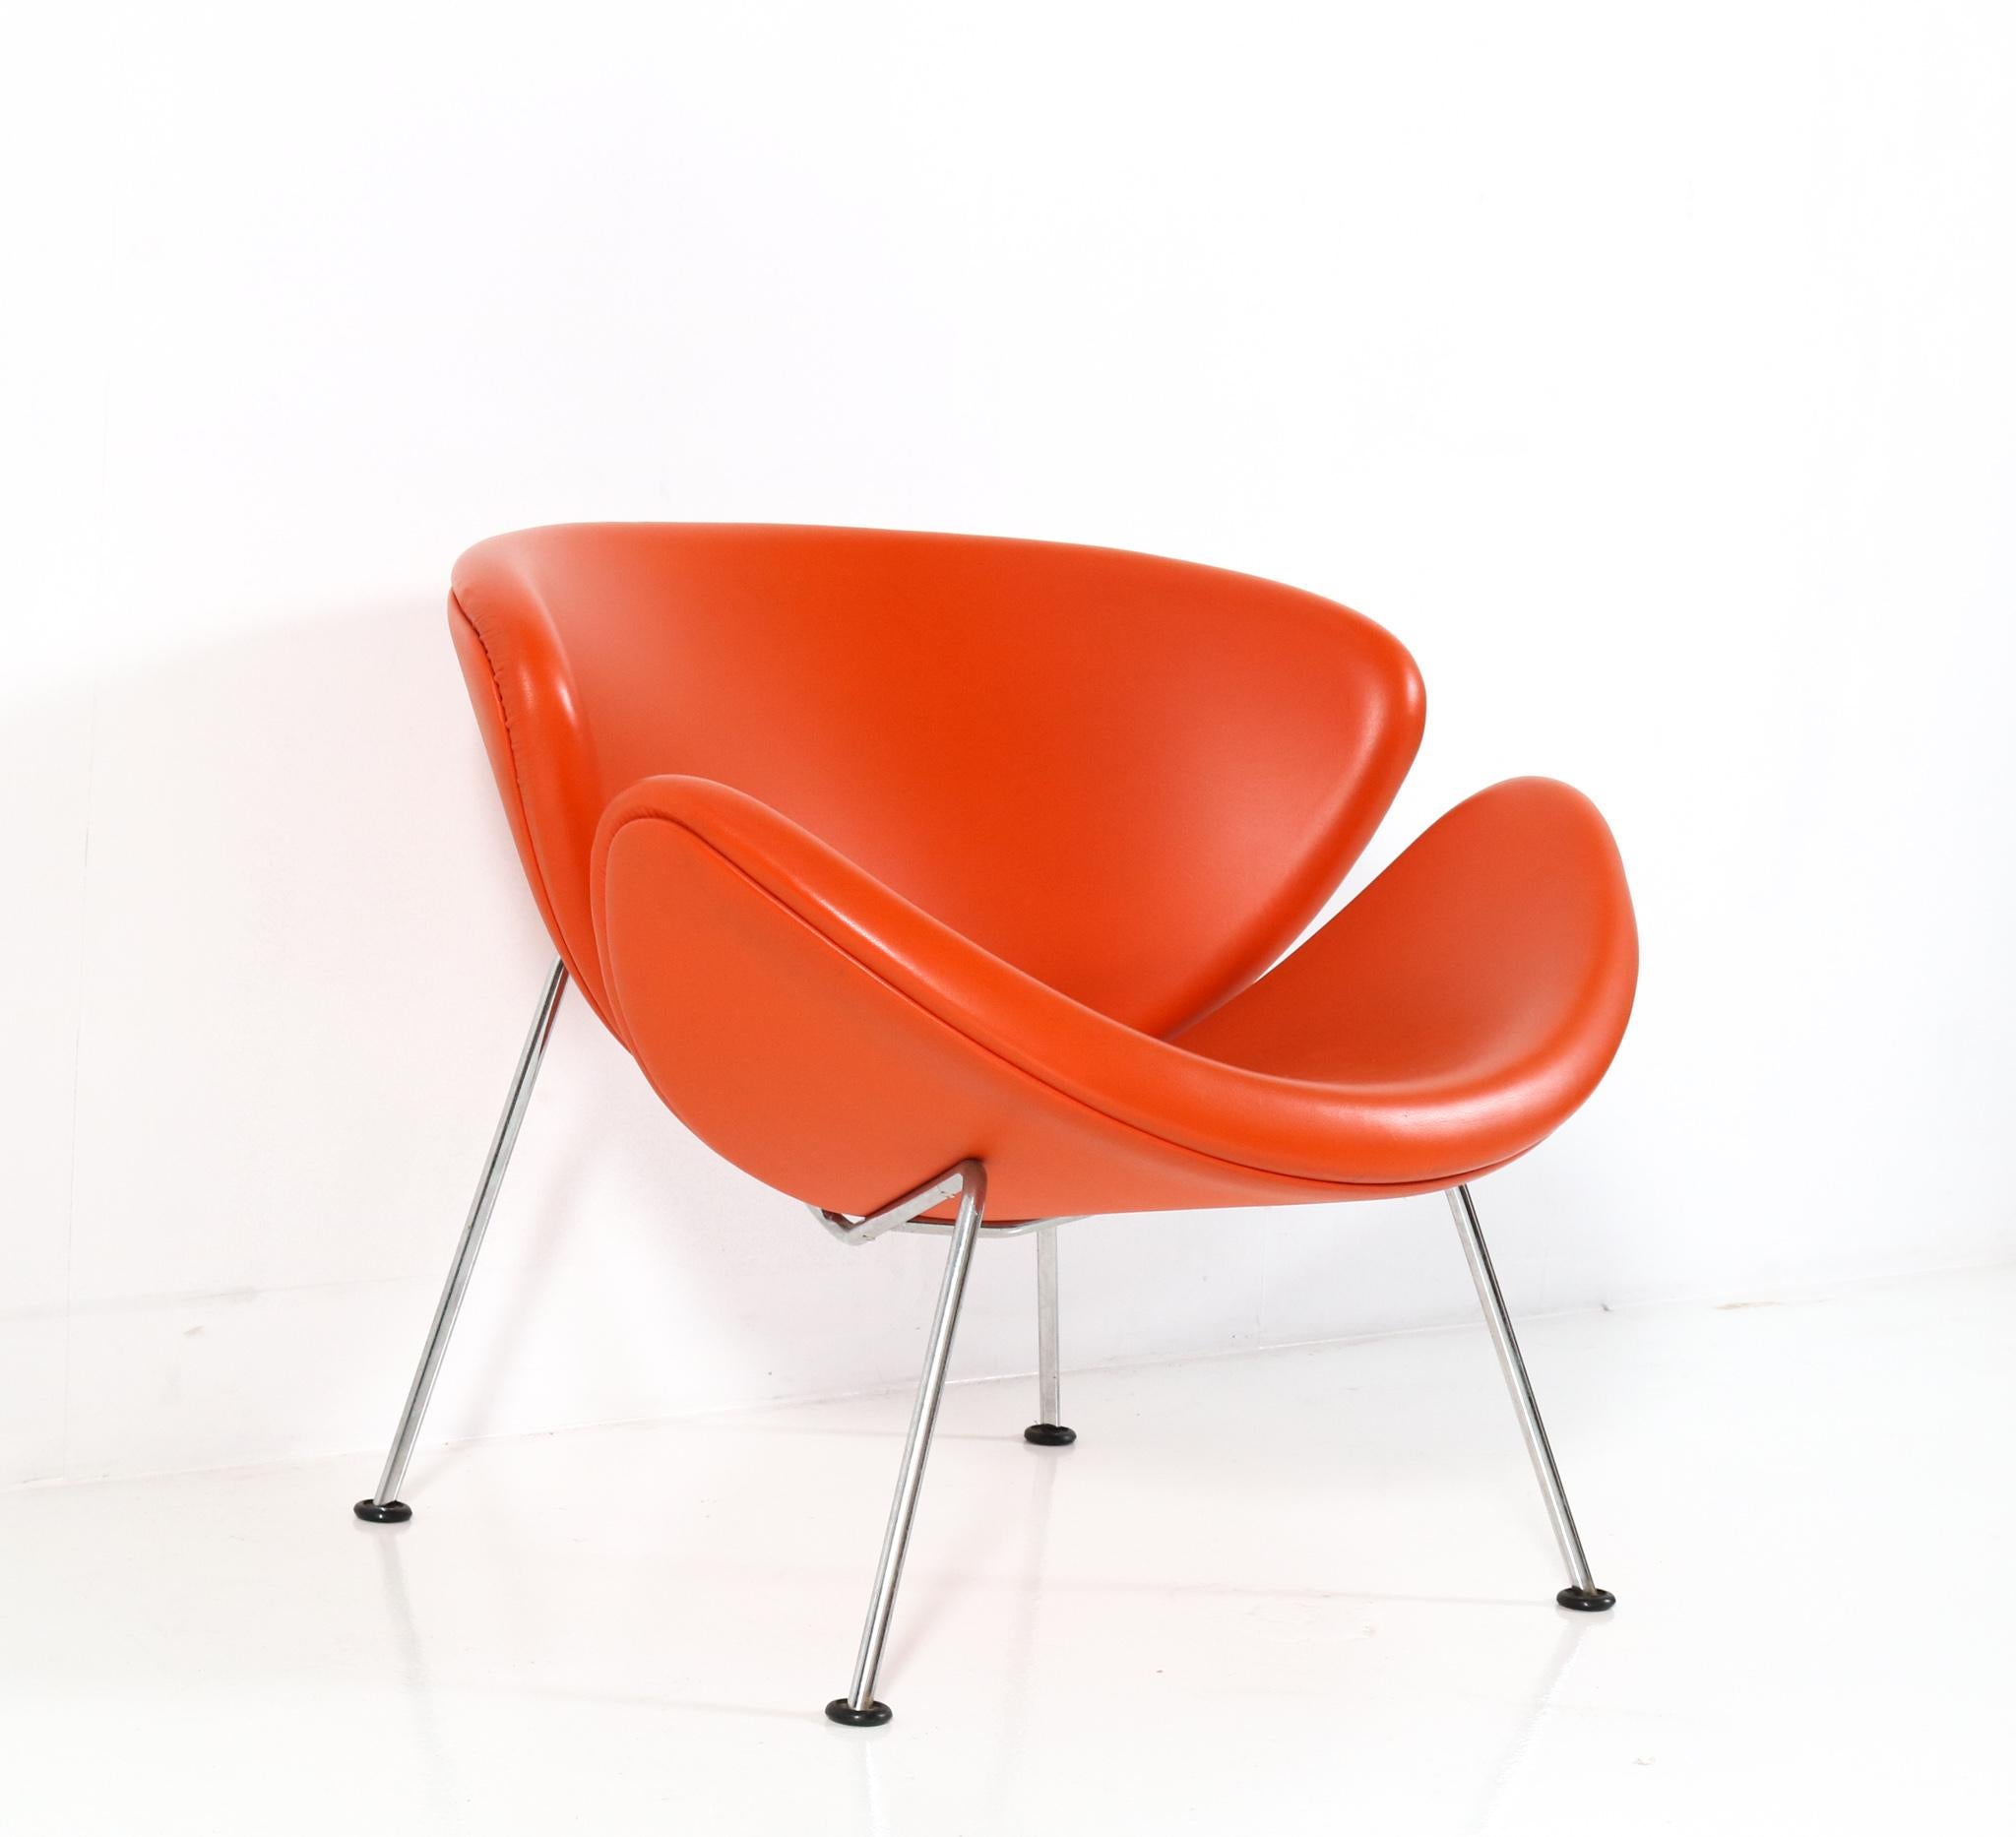 Stunning Vintage Orange Slice lounge chair.
Design by Pierre Paulin for Artifort.
Striking Dutch design from the 1960s.
This version is from the 1990s.
Original orange leather upholstered shells on chrome frame.
In good original condition with